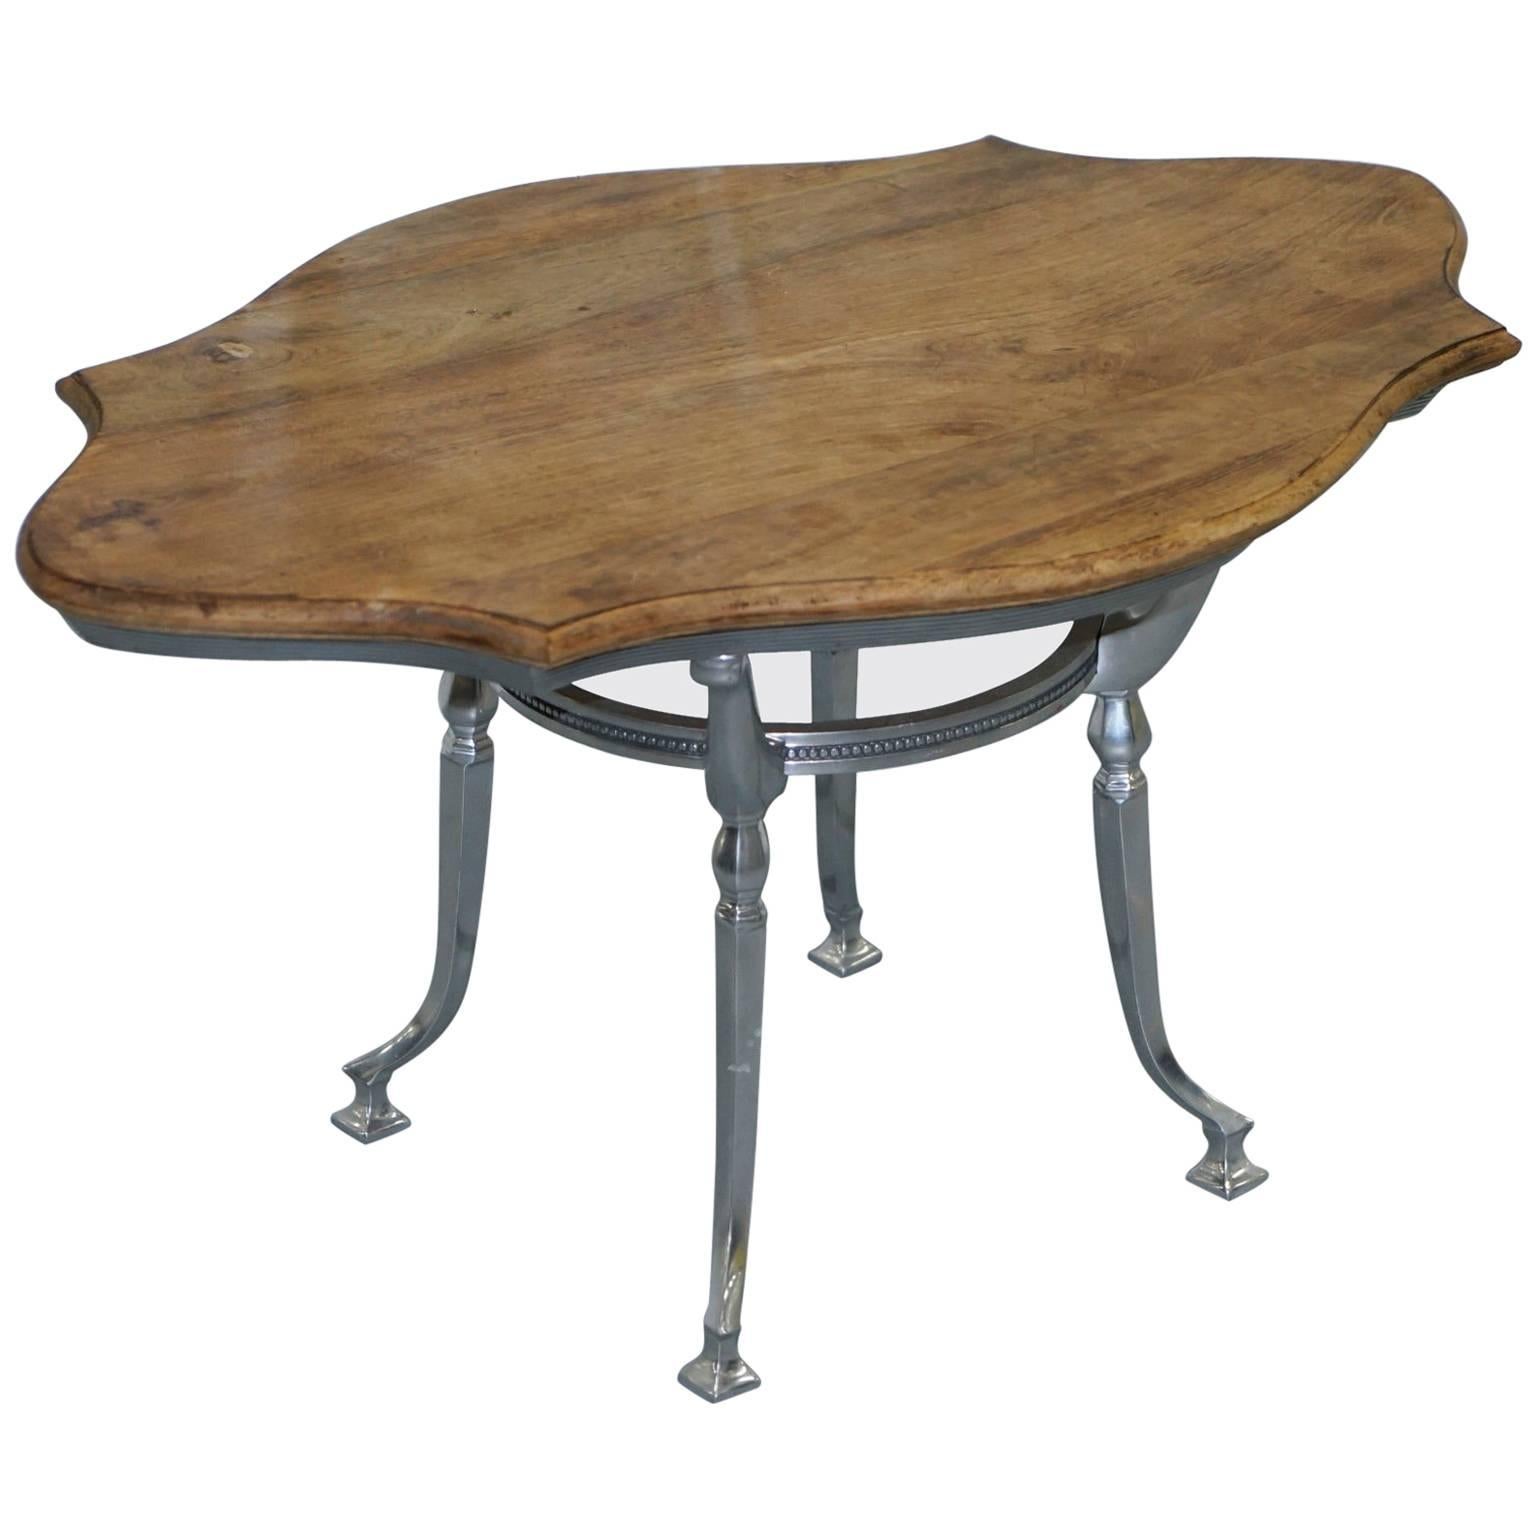 Stunning Chrome Silver Plated Coffee Table with Natural Stripped Oak Top Lovely